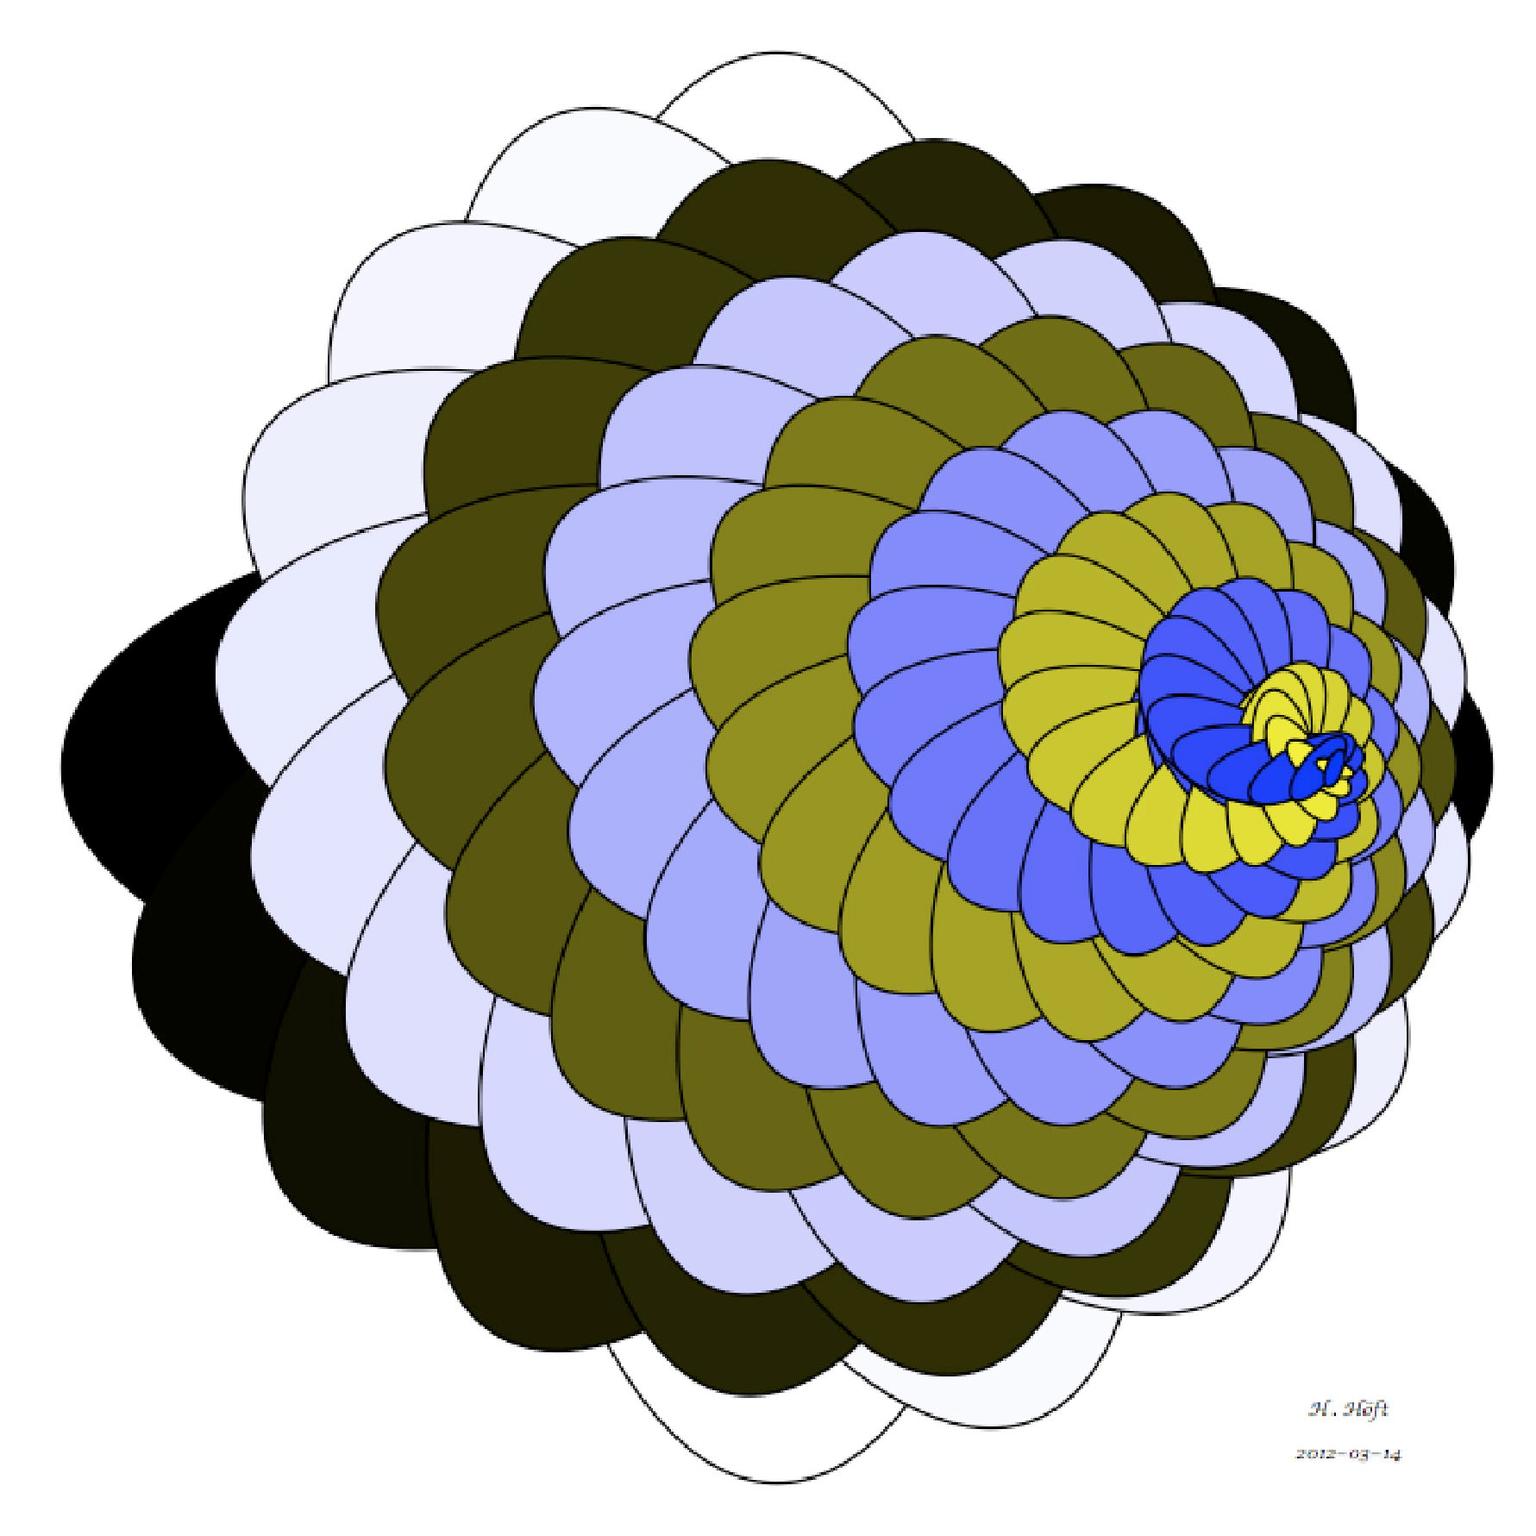 Image for entry 'Colored Shell'